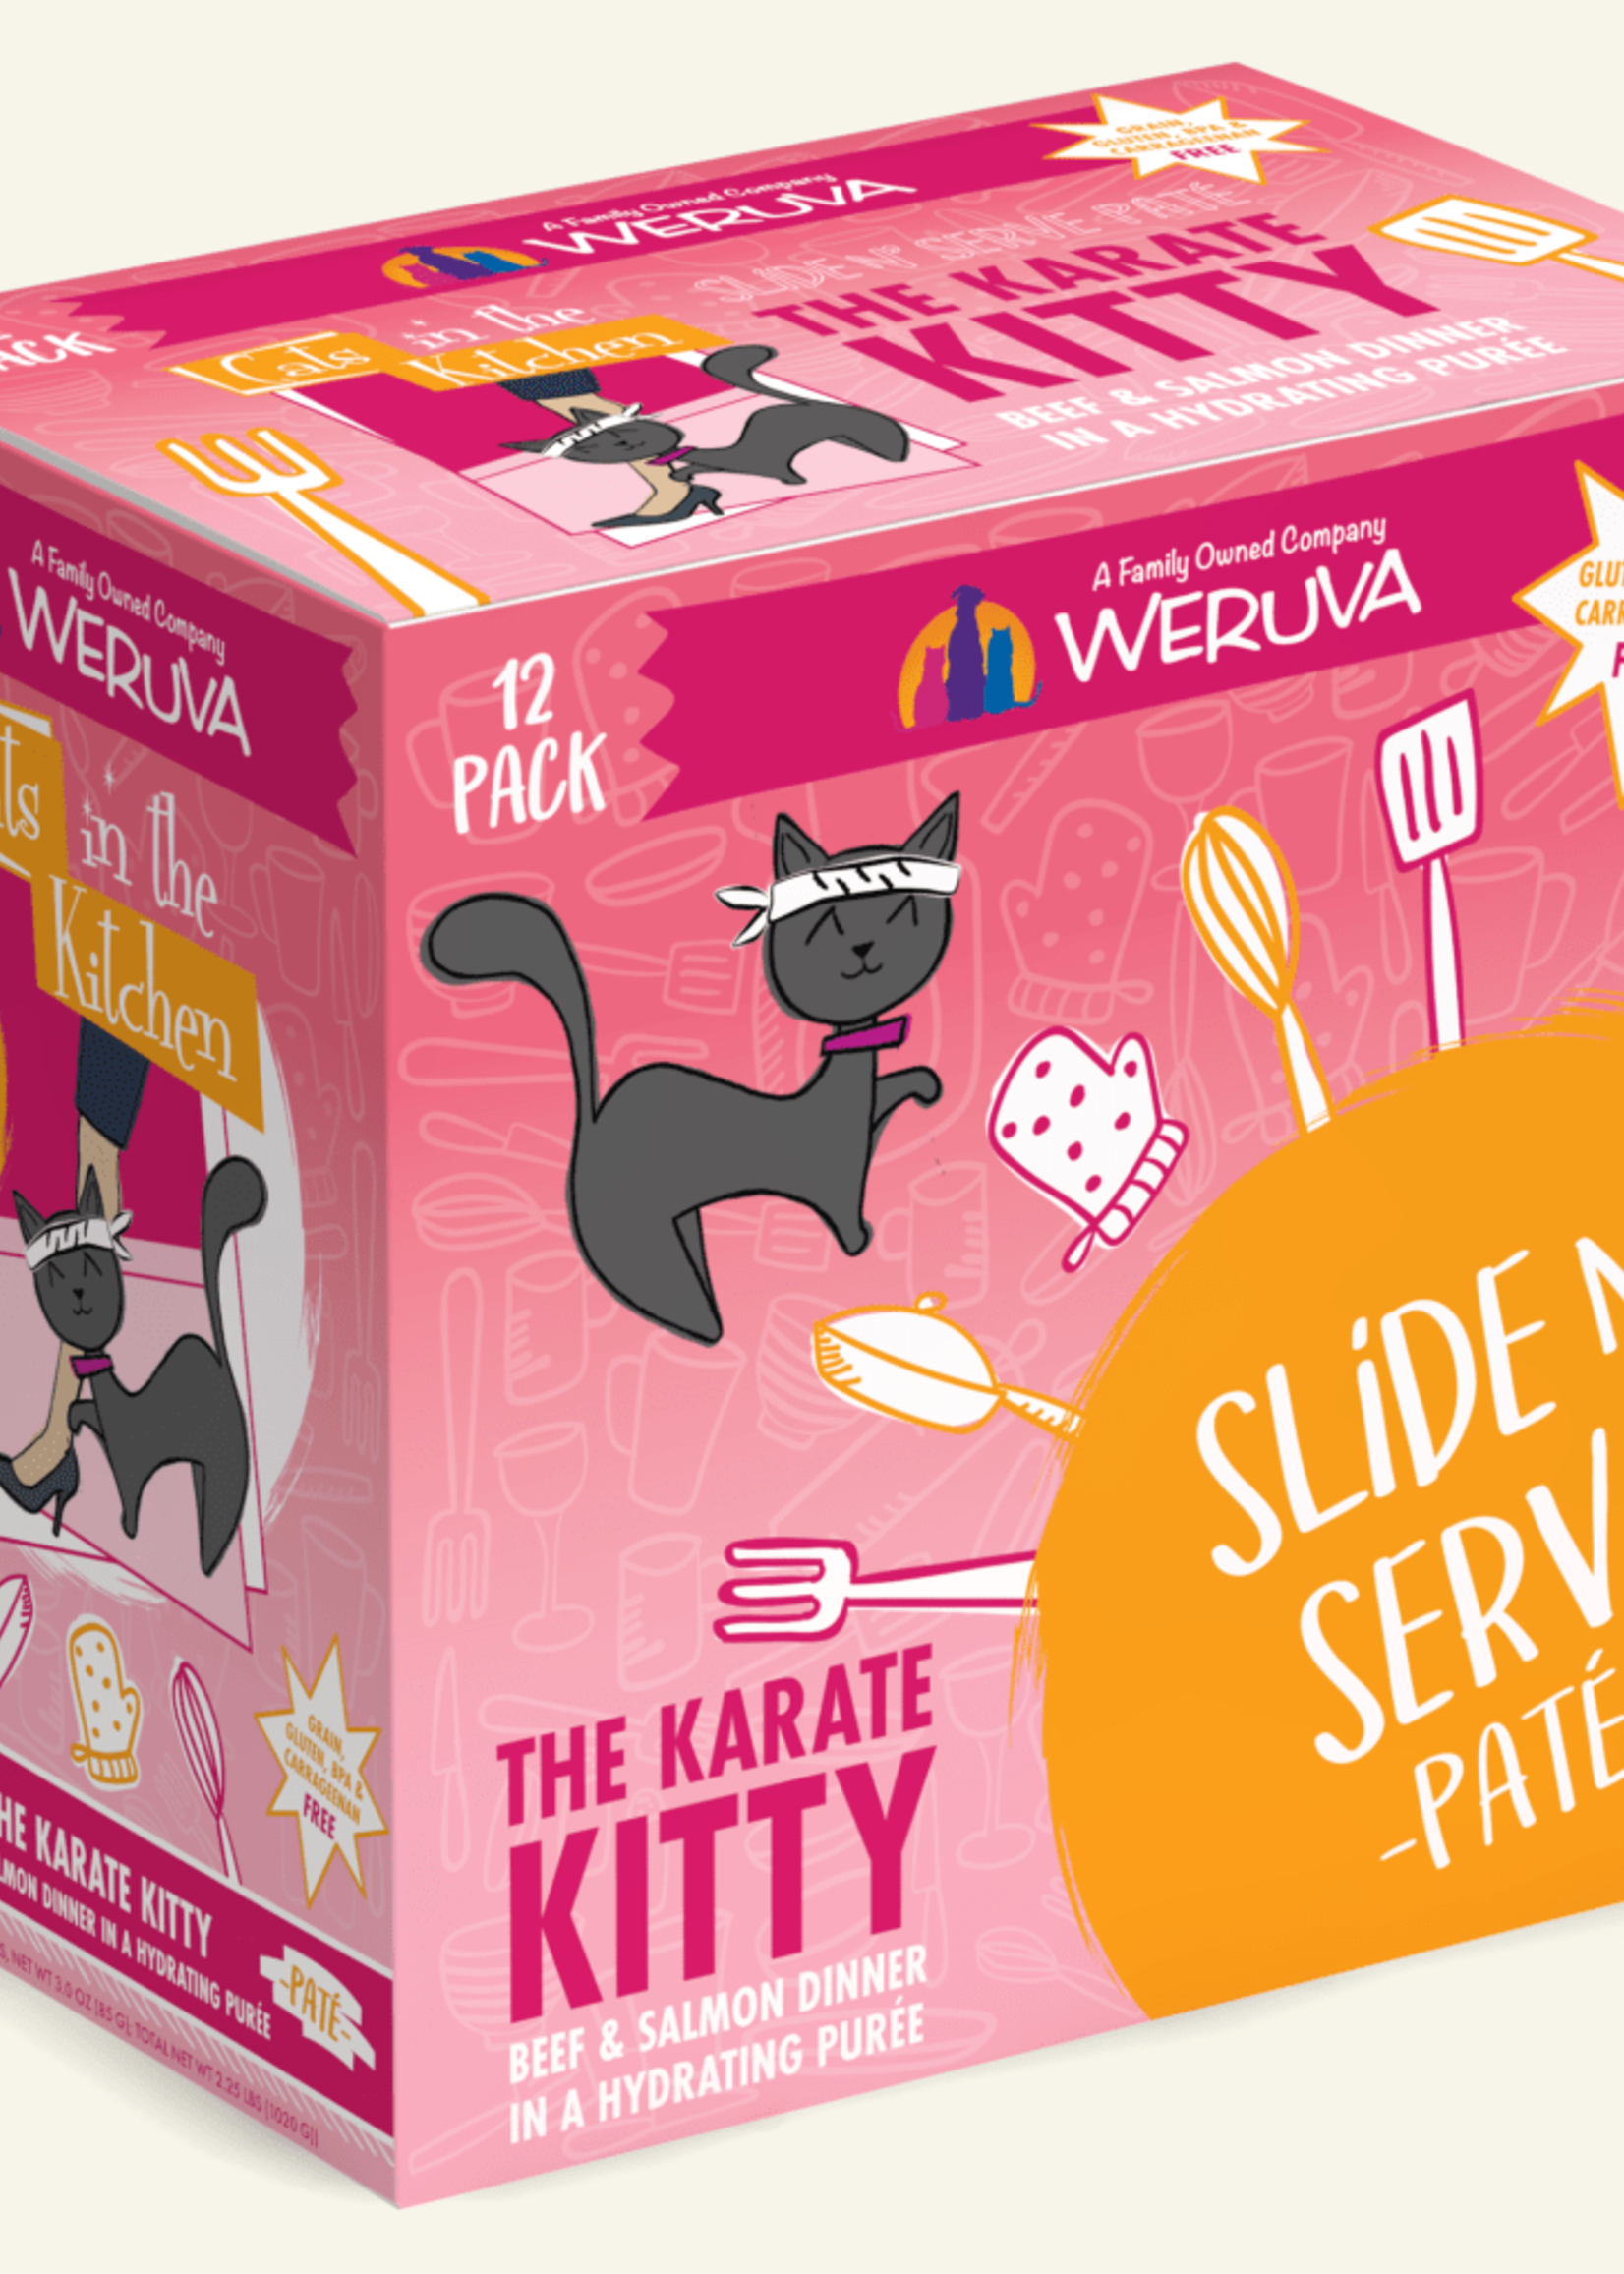 Weruva Weruva CITK Pate The Karate Kitty with Beef & Salmon, 3oz Pouch Wet Cat Food (Pack of 12)